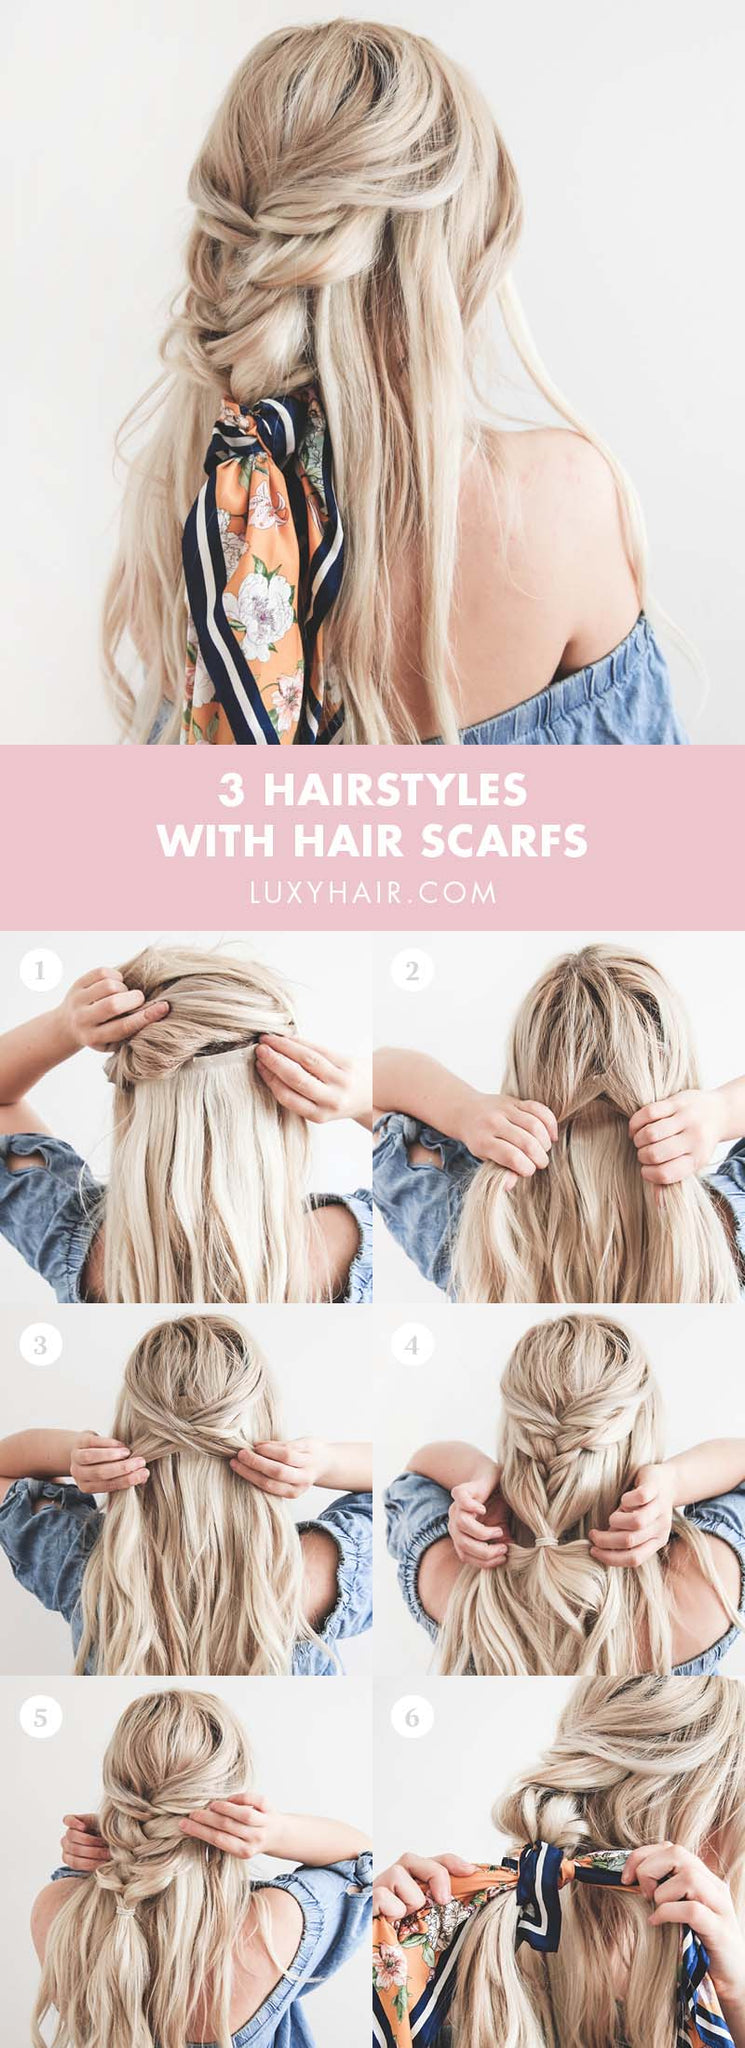 Hairstyles with headscarves